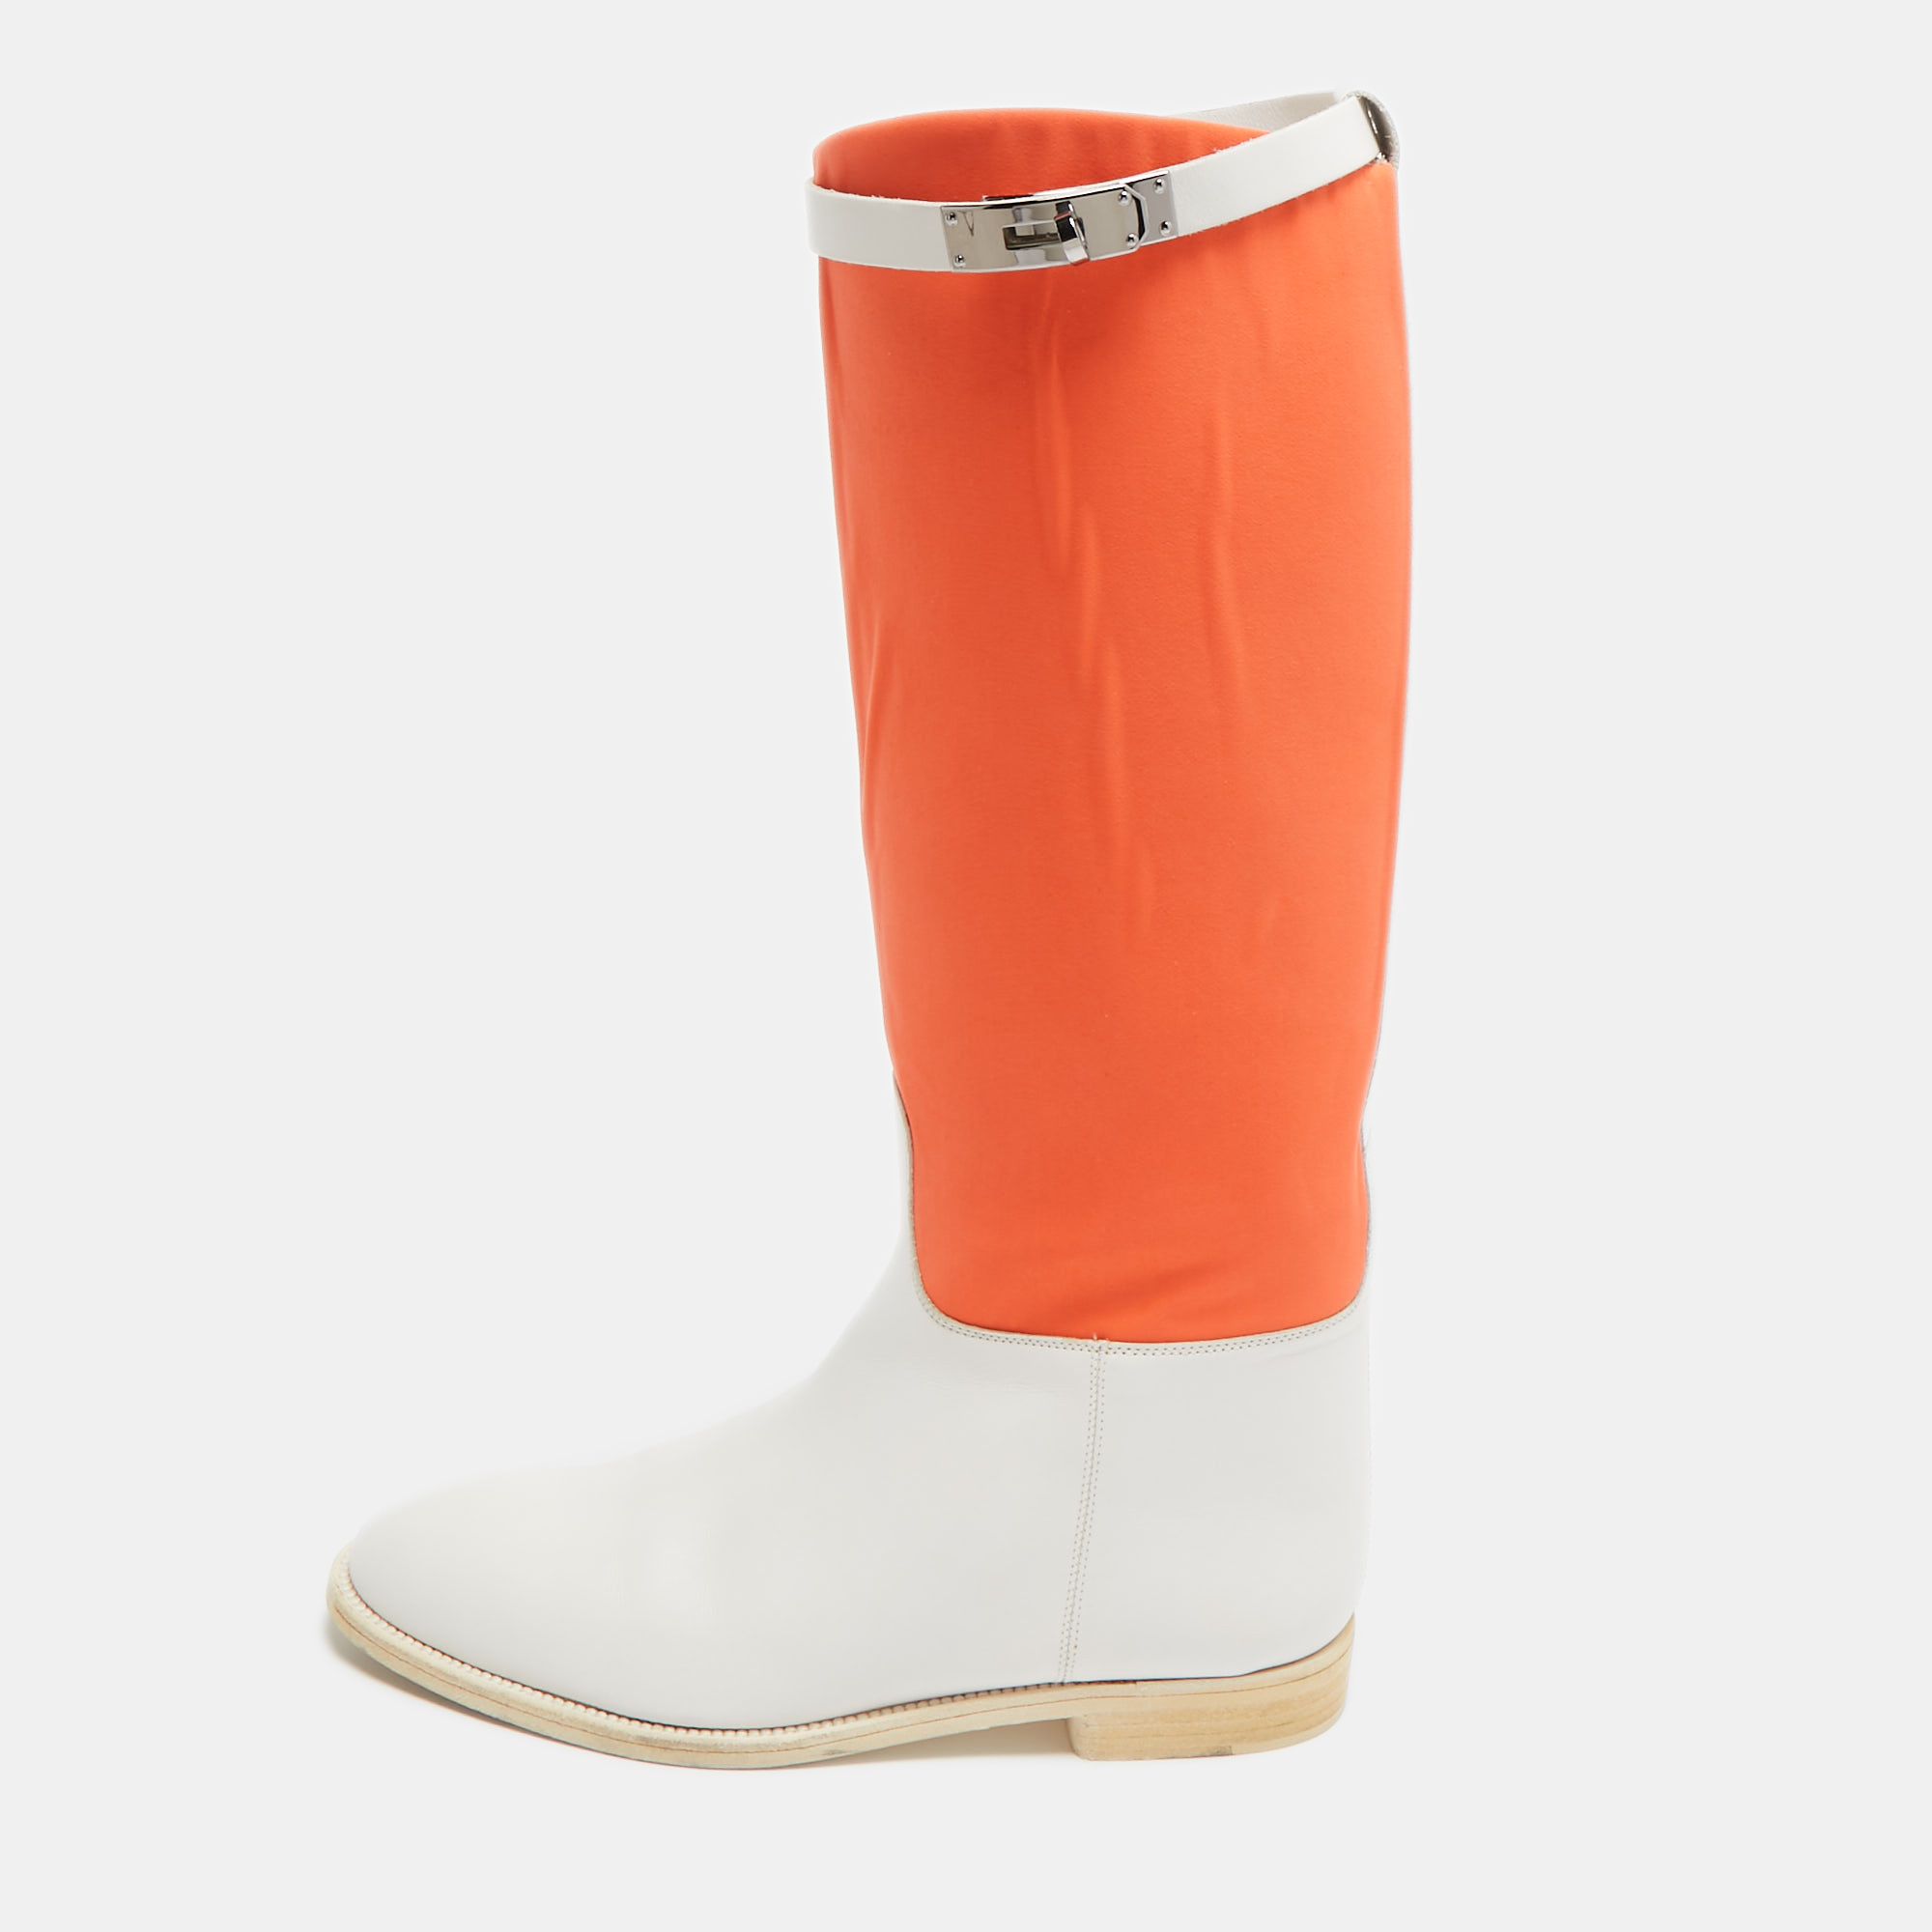 Hermes neon orange/white neoprene and leather jumping boots size 39